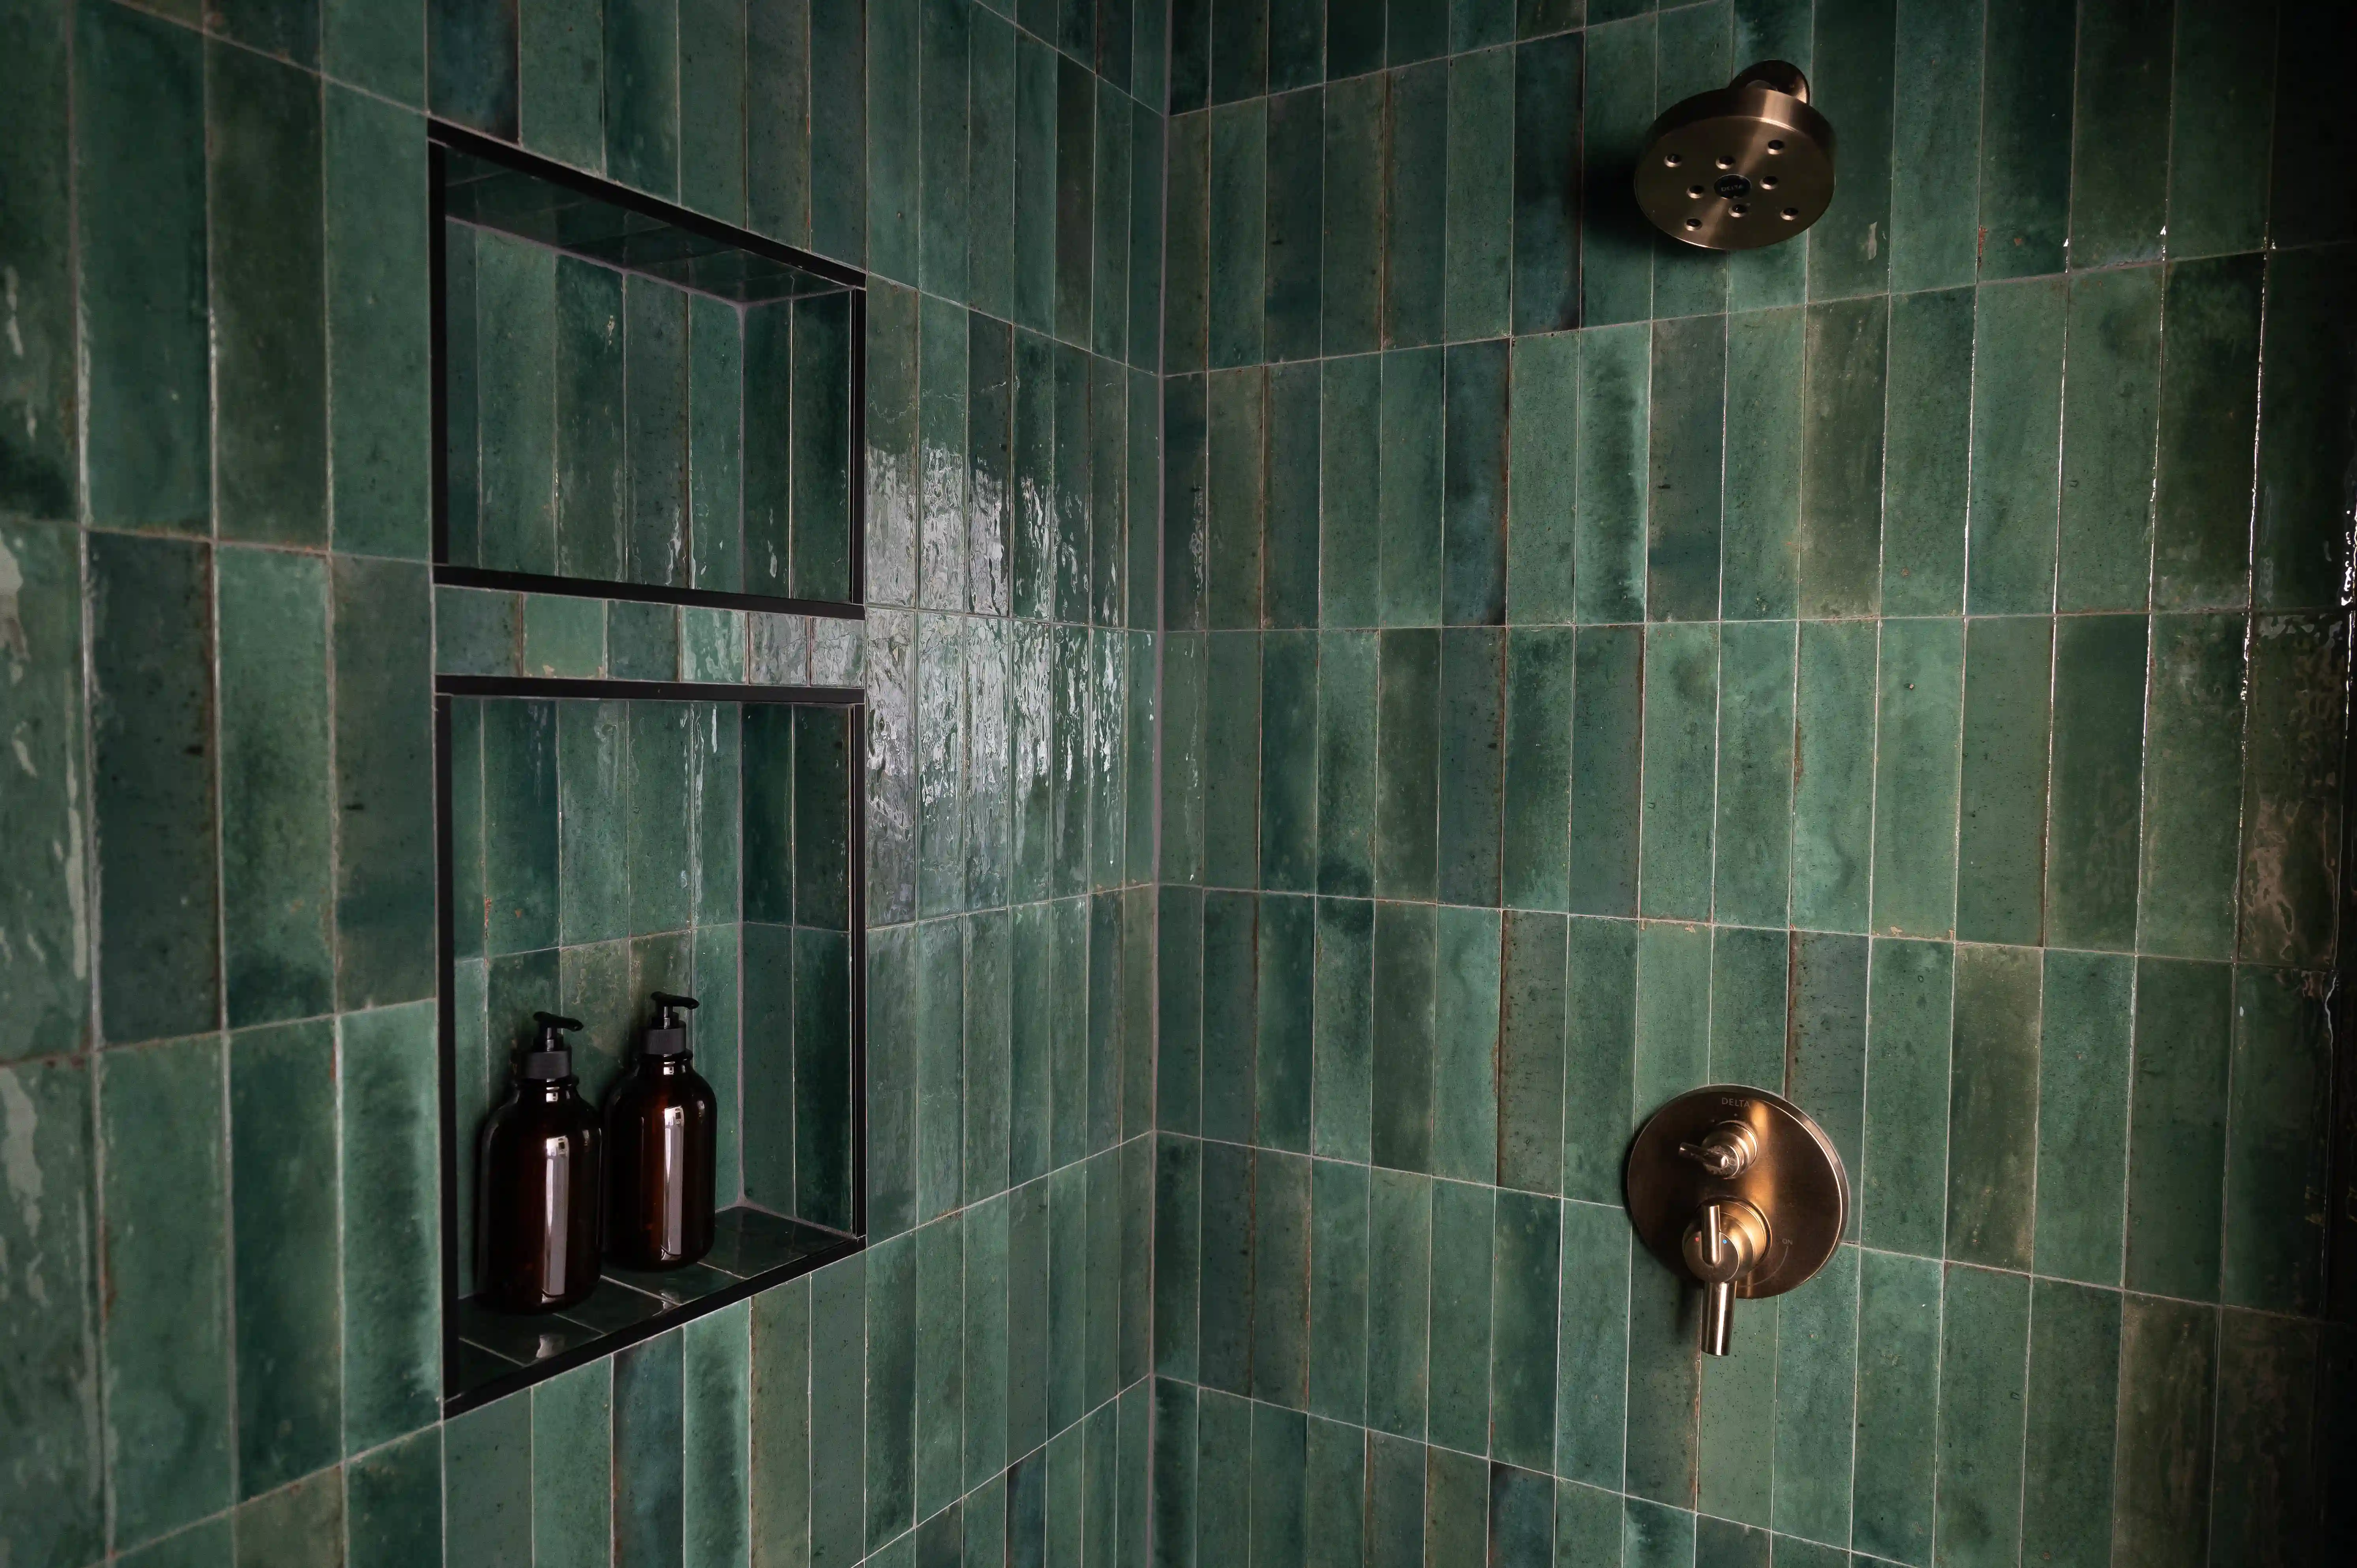 The Corner of a green tiled shower, top to bottom. The shower has two shelves built into the left wall with two amber glass bottles sitting on the bottom shelf. On the right side wall of the shower is a brass colored circular shower head with a matching handle below. 